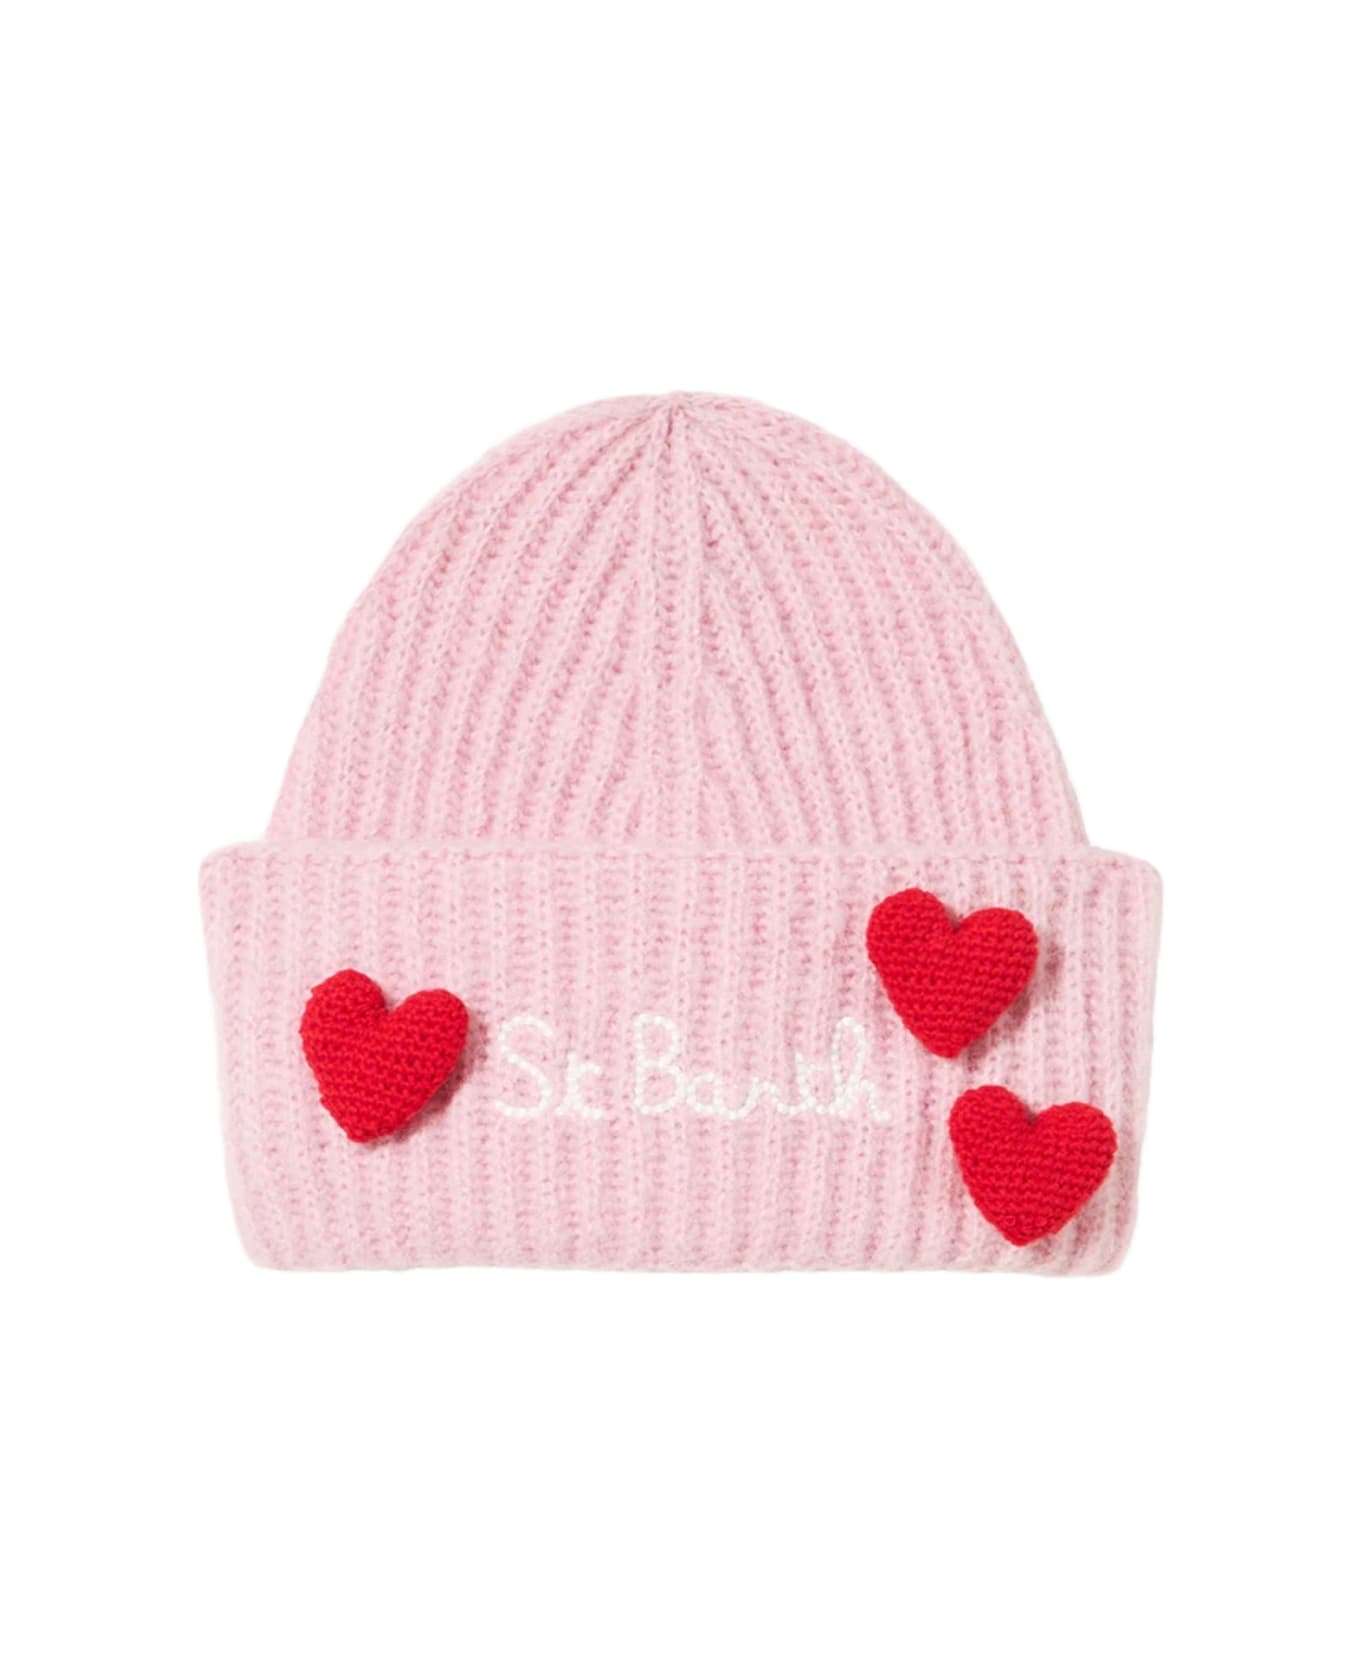 MC2 Saint Barth Woman Brushed And Ultra Soft Beanie With Hearts Appliqués - PINK 帽子